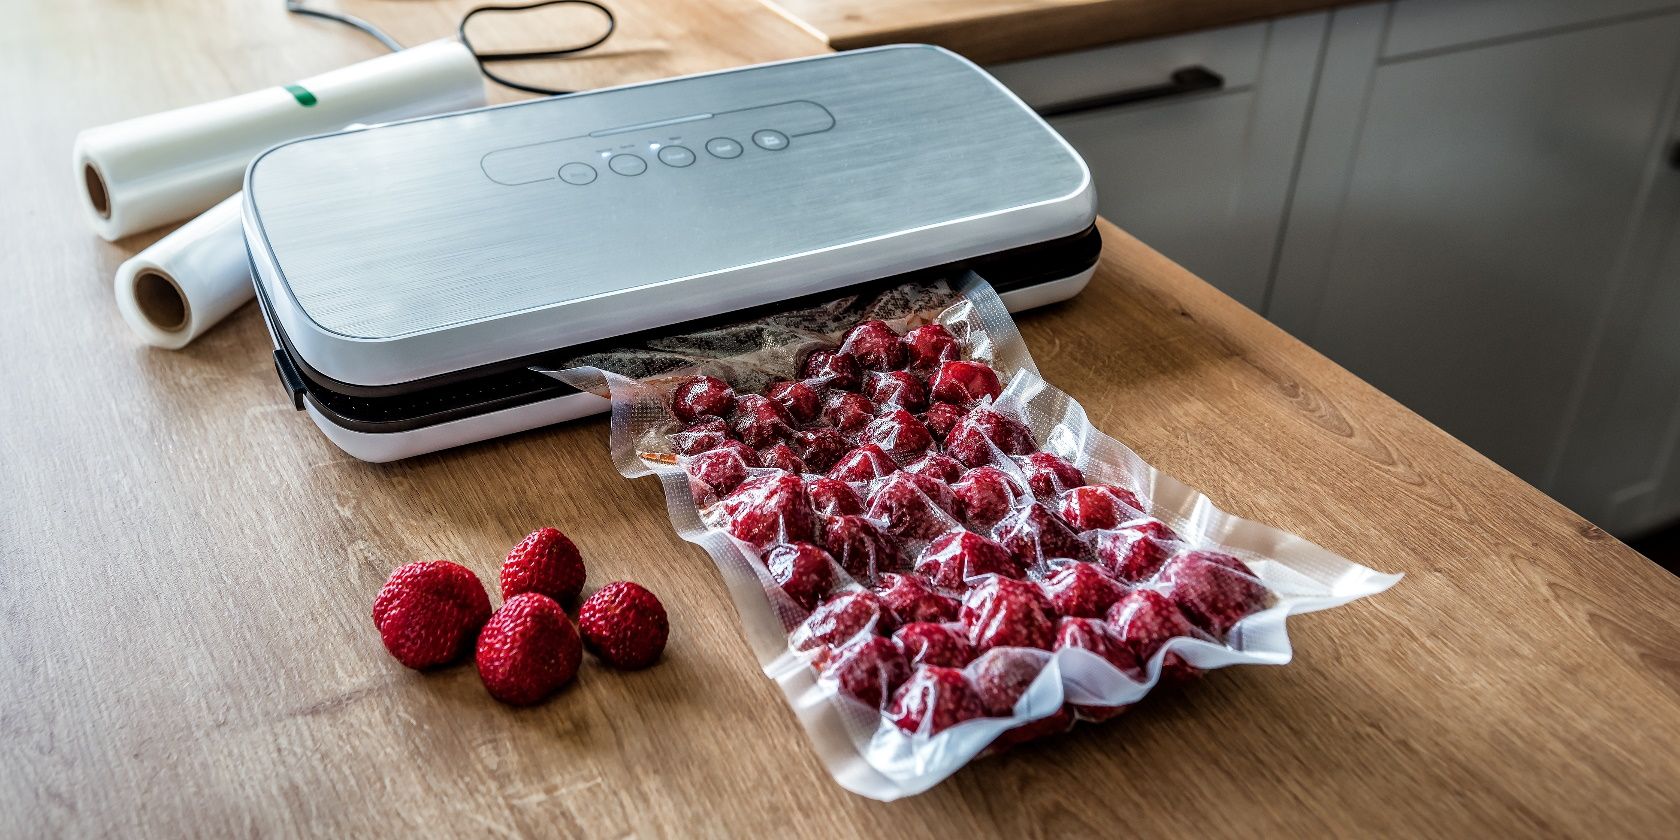 Vacuum Sealer By NutriChef Review 